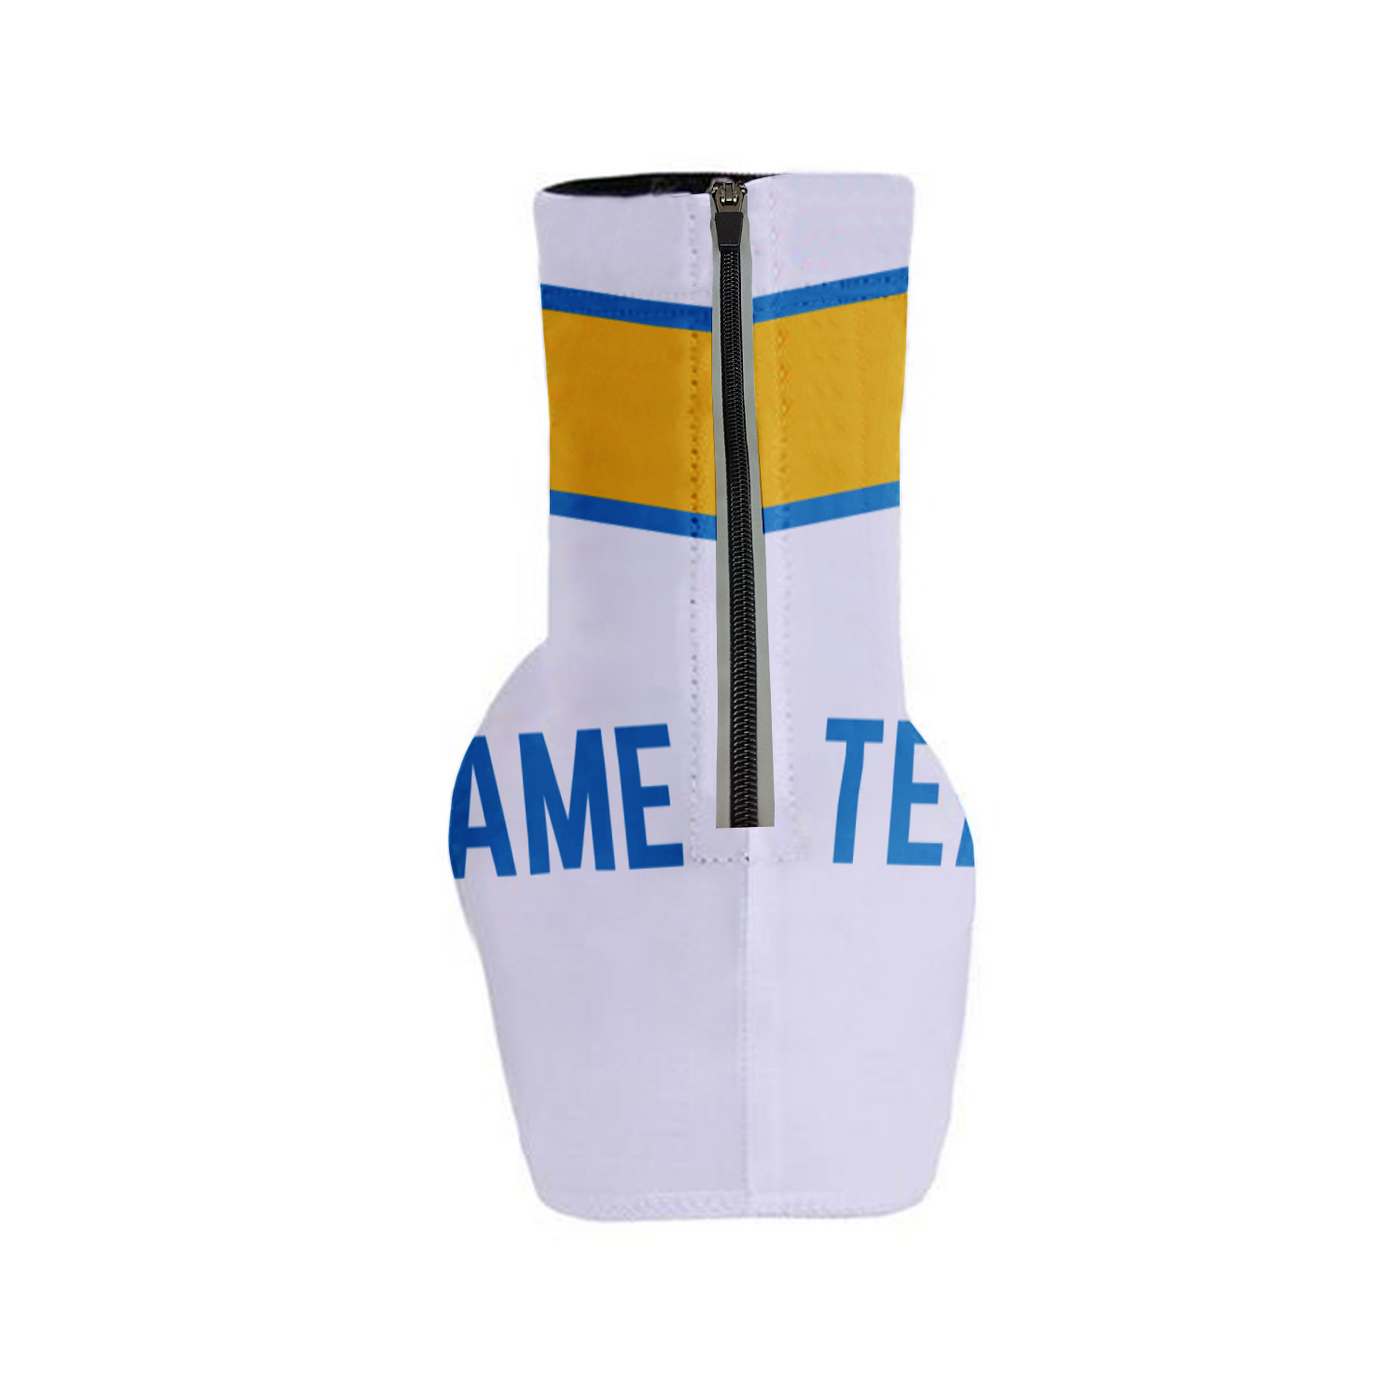 Customized Los Angeles Cycling Shoe Covers